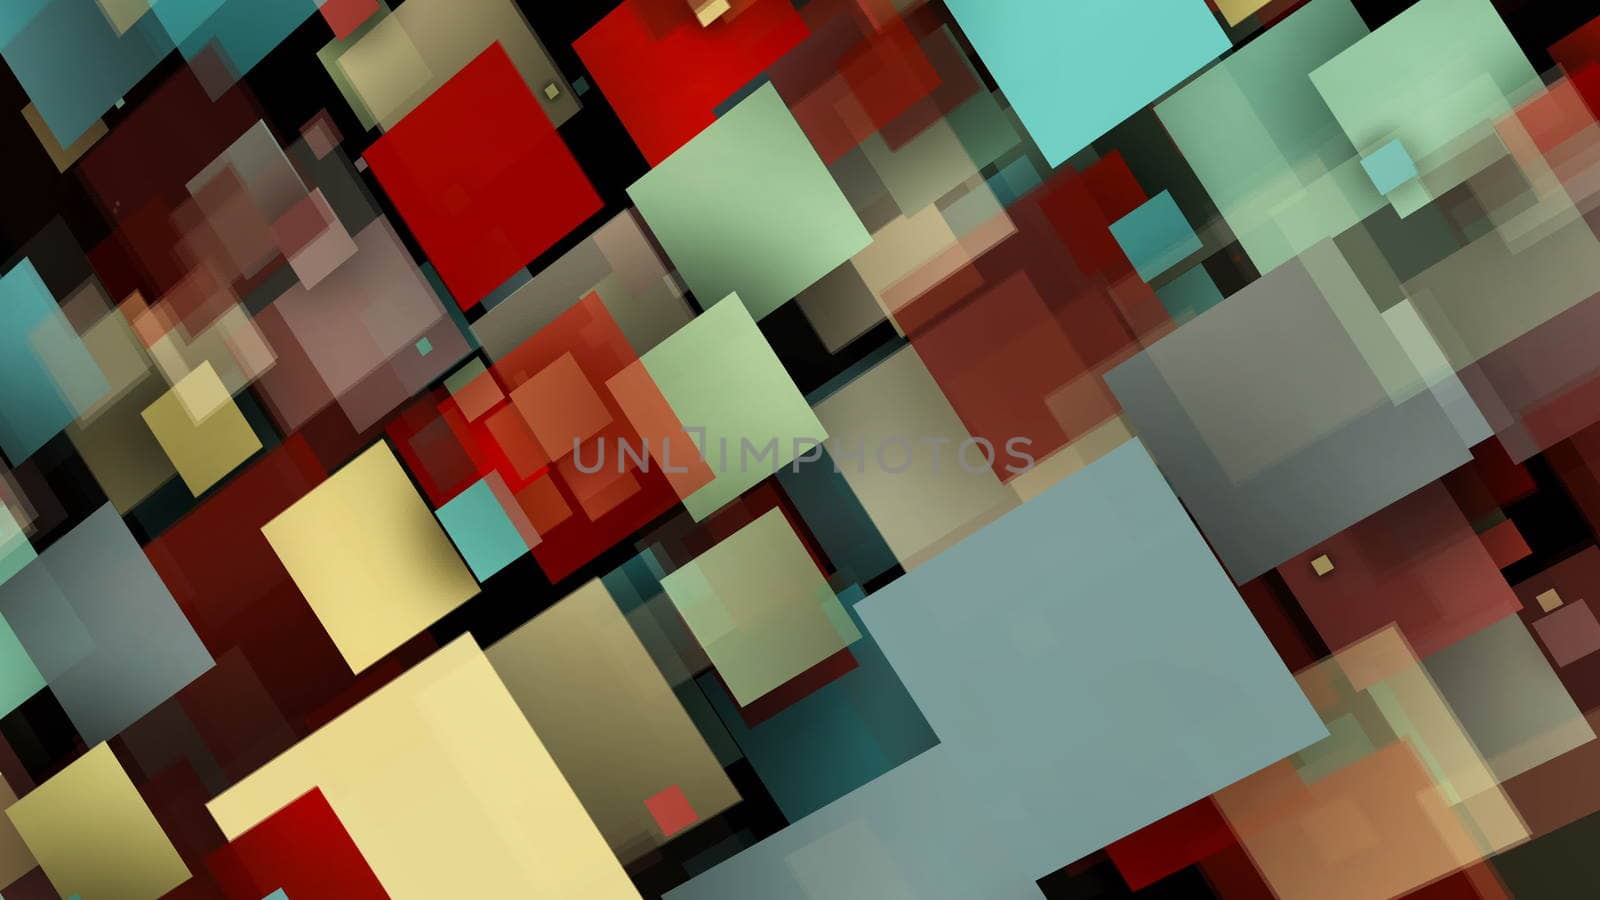 Abstract background with colorful rectangles by nolimit046